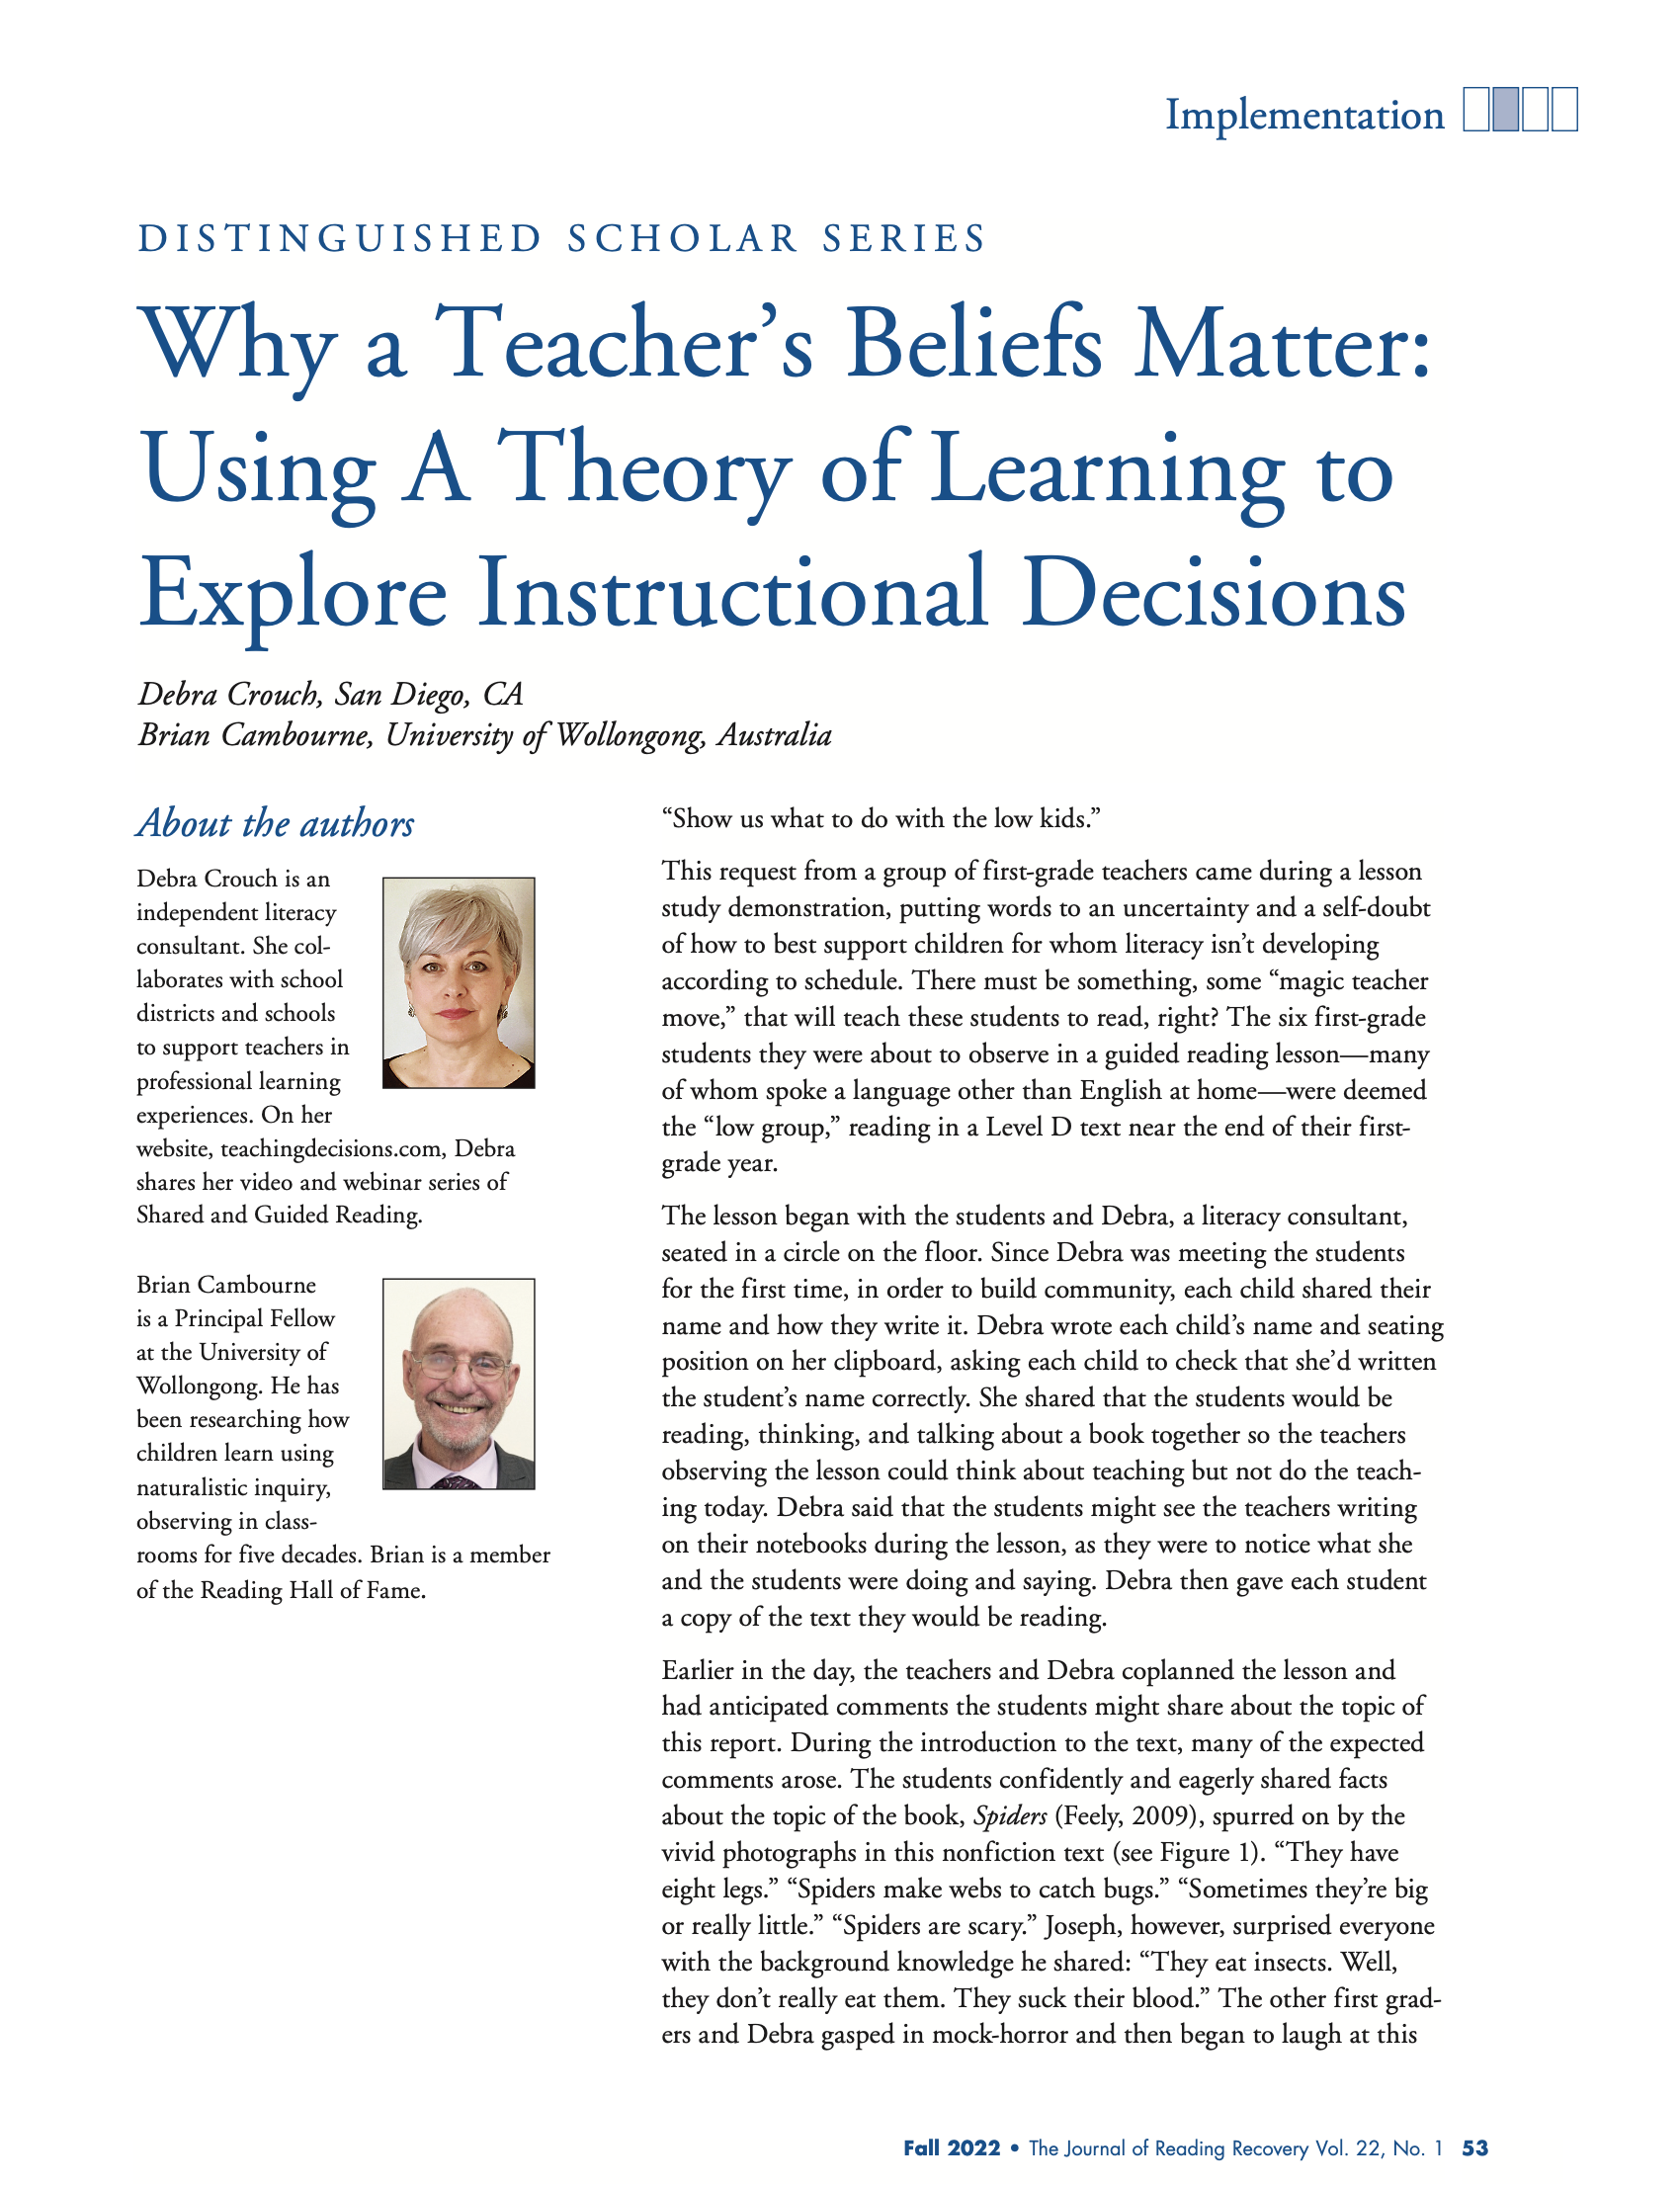 Teaching Decisions -DISTINGUISHED SCHOLAR SERIES Why a Teacher’s Beliefs Matter: Using A Theory of Learning to Explore Instructional Decisions